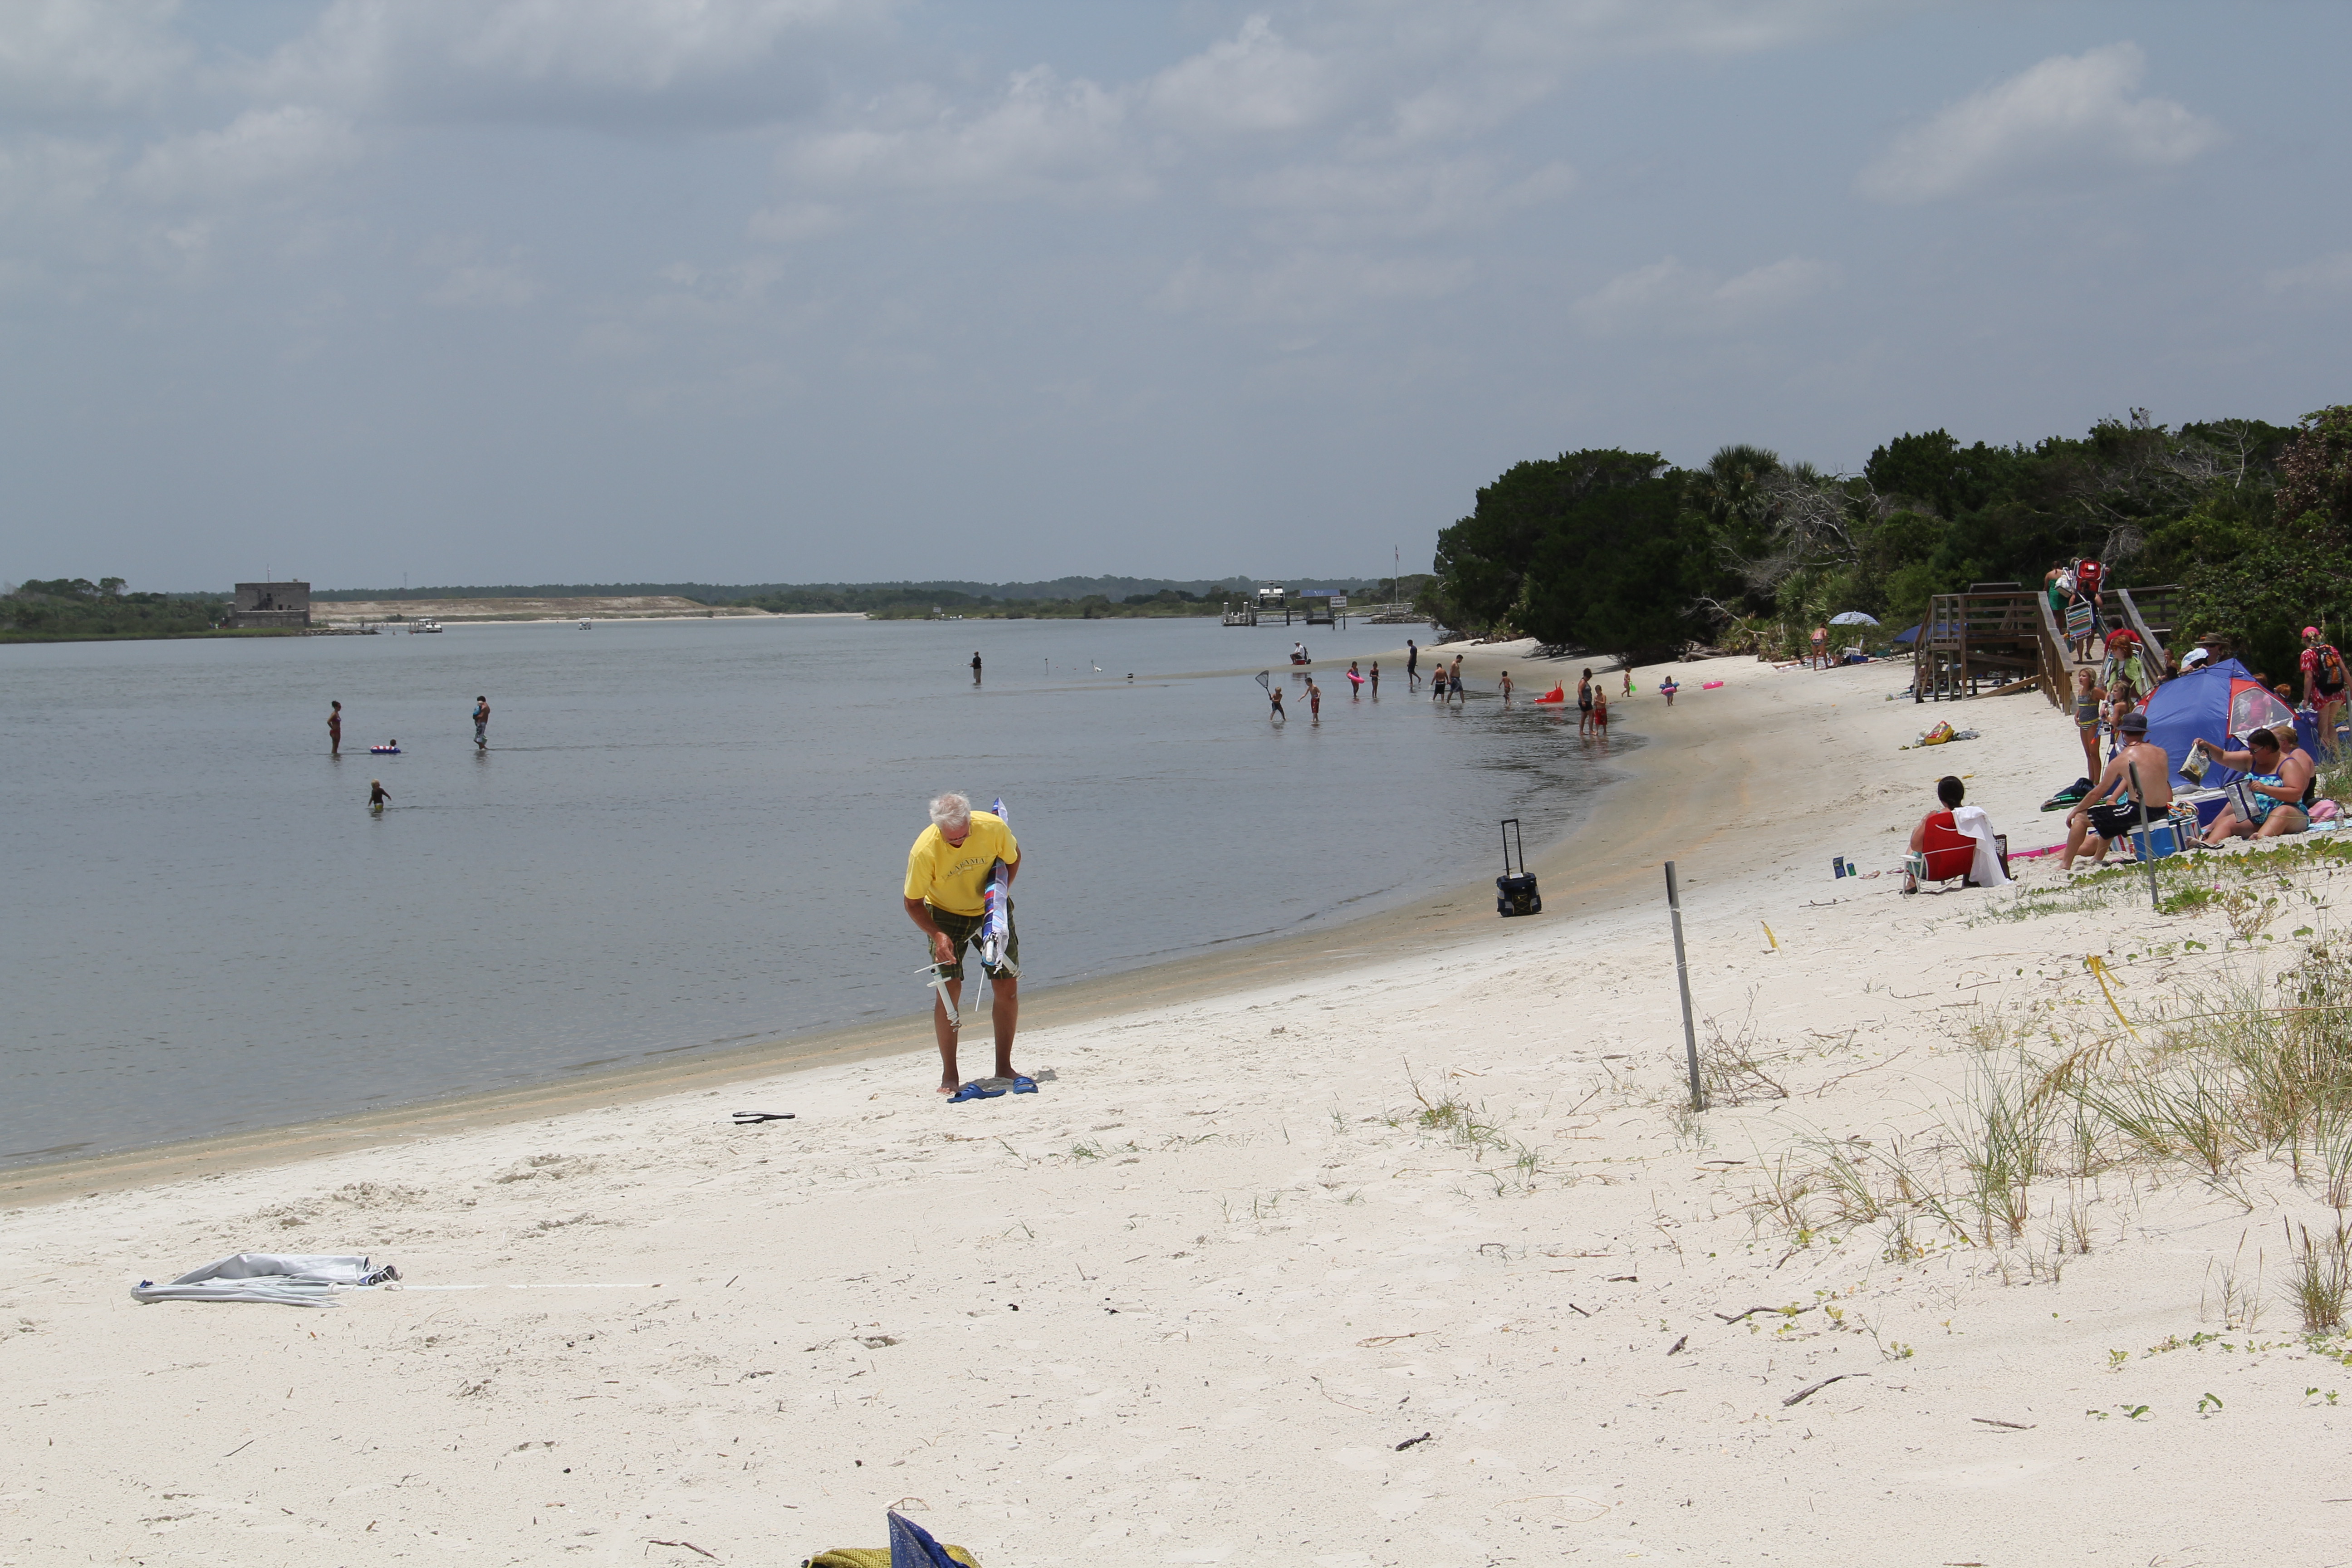 People wading in the river and relaxing on the beach.